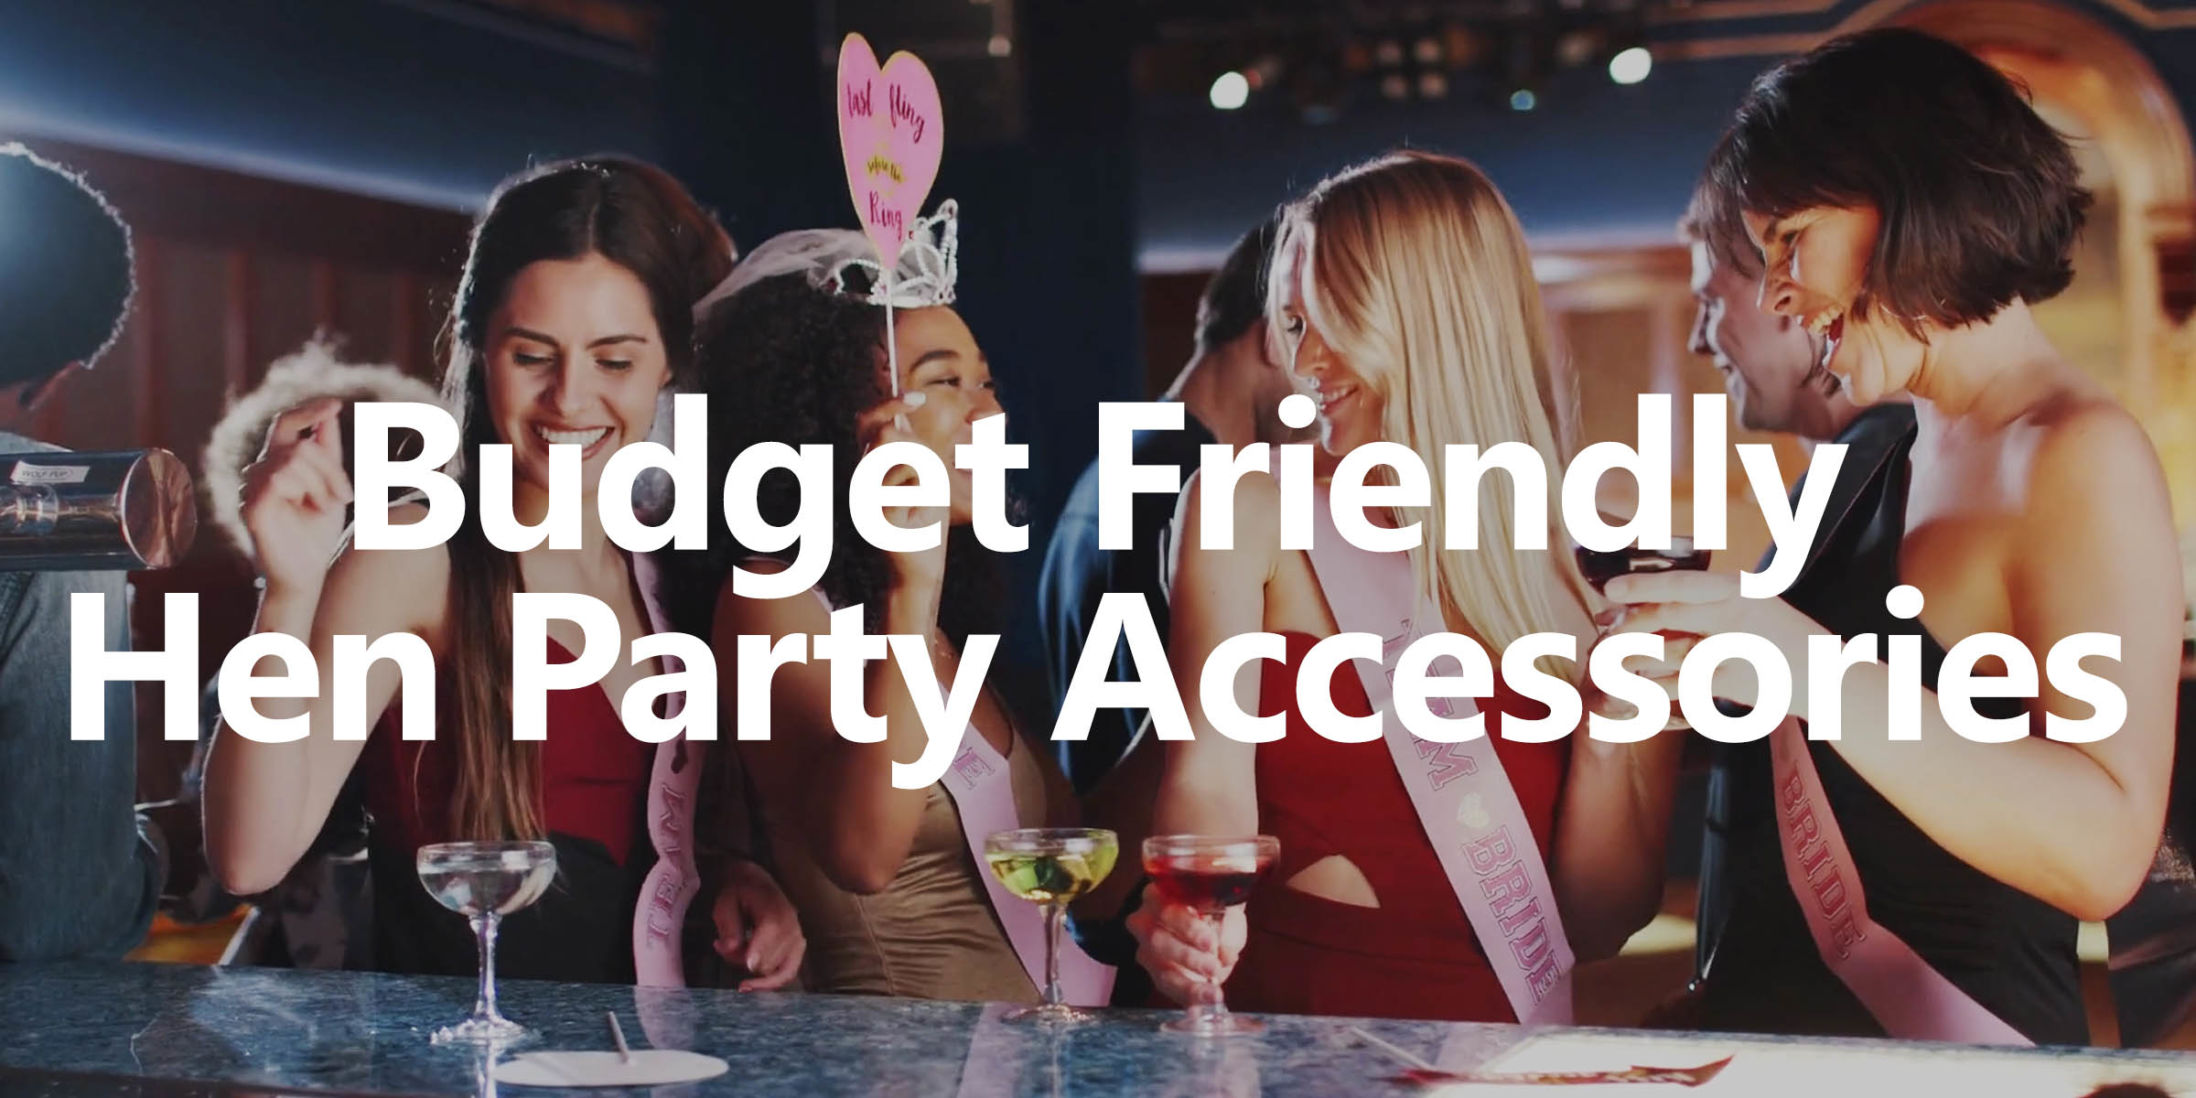 Budget Friendly Hen Party Accessories